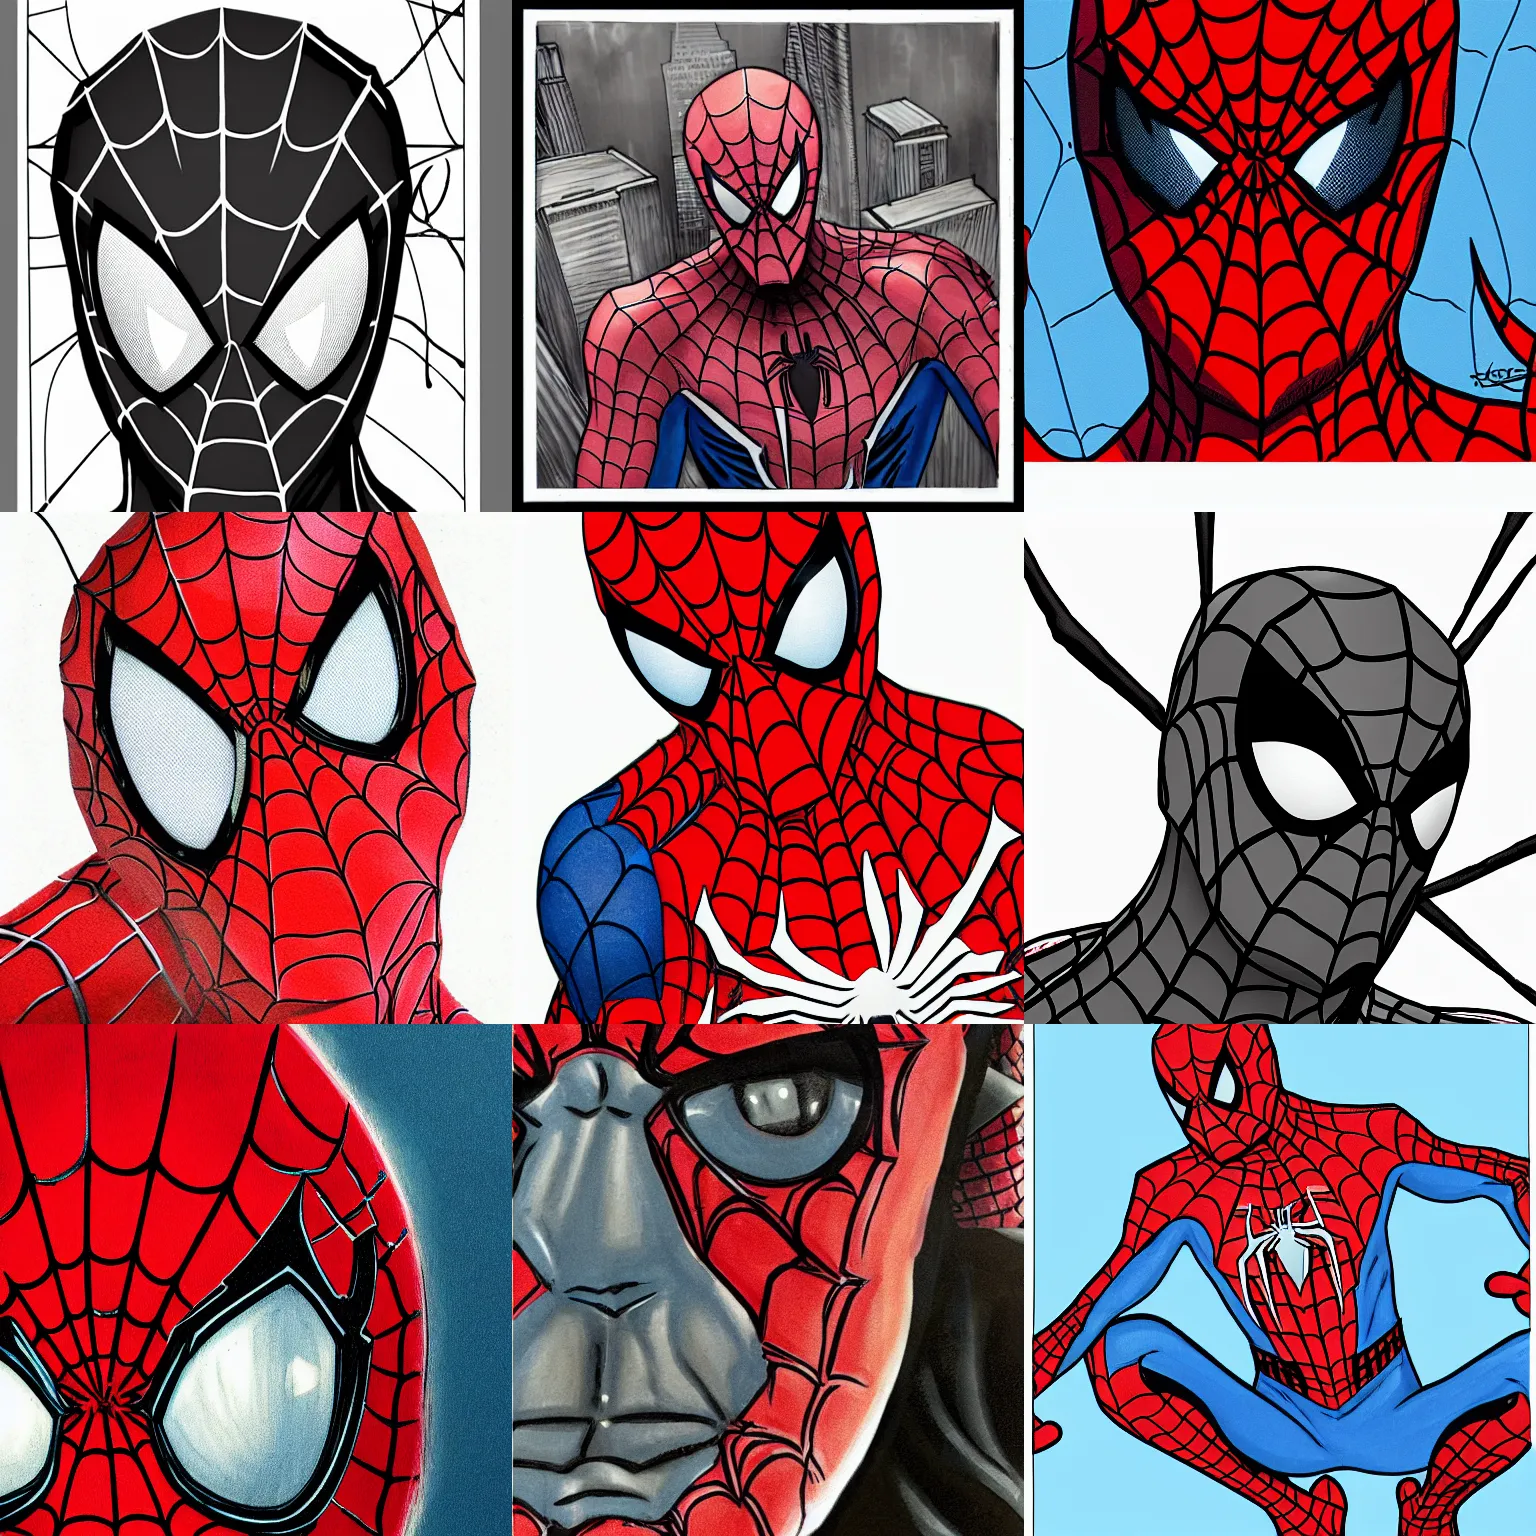 Prompt: mcfarlane spiderman!!! close up headshot of spider-man in mcfarlane style , comic book color drawing by mcfarlane